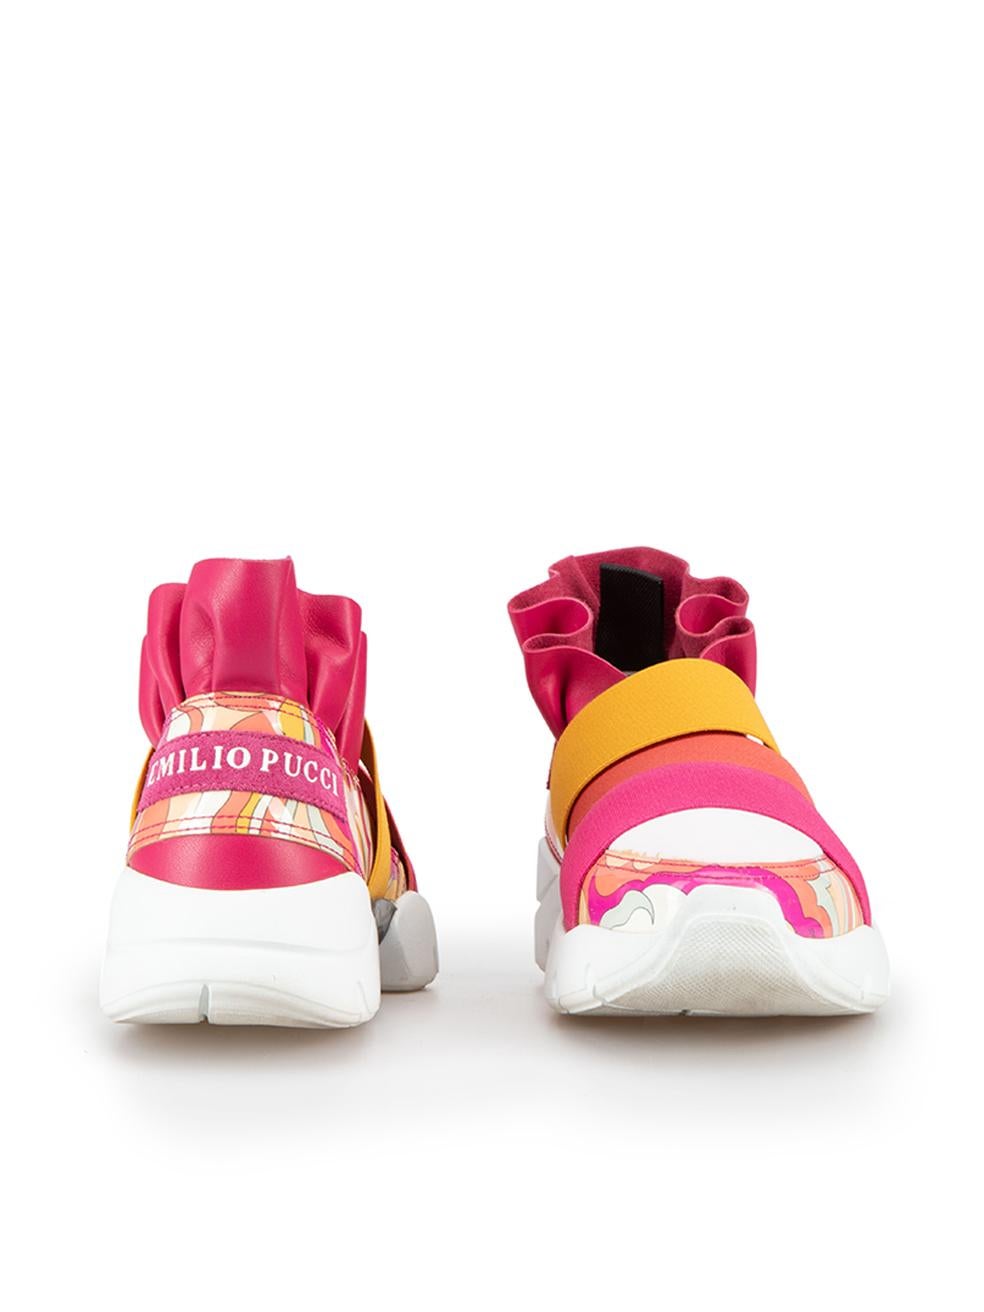 Emilio Pucci Pink & Yellow Leather Ruffle Trim Trainers Size IT 36 In Good Condition For Sale In London, GB